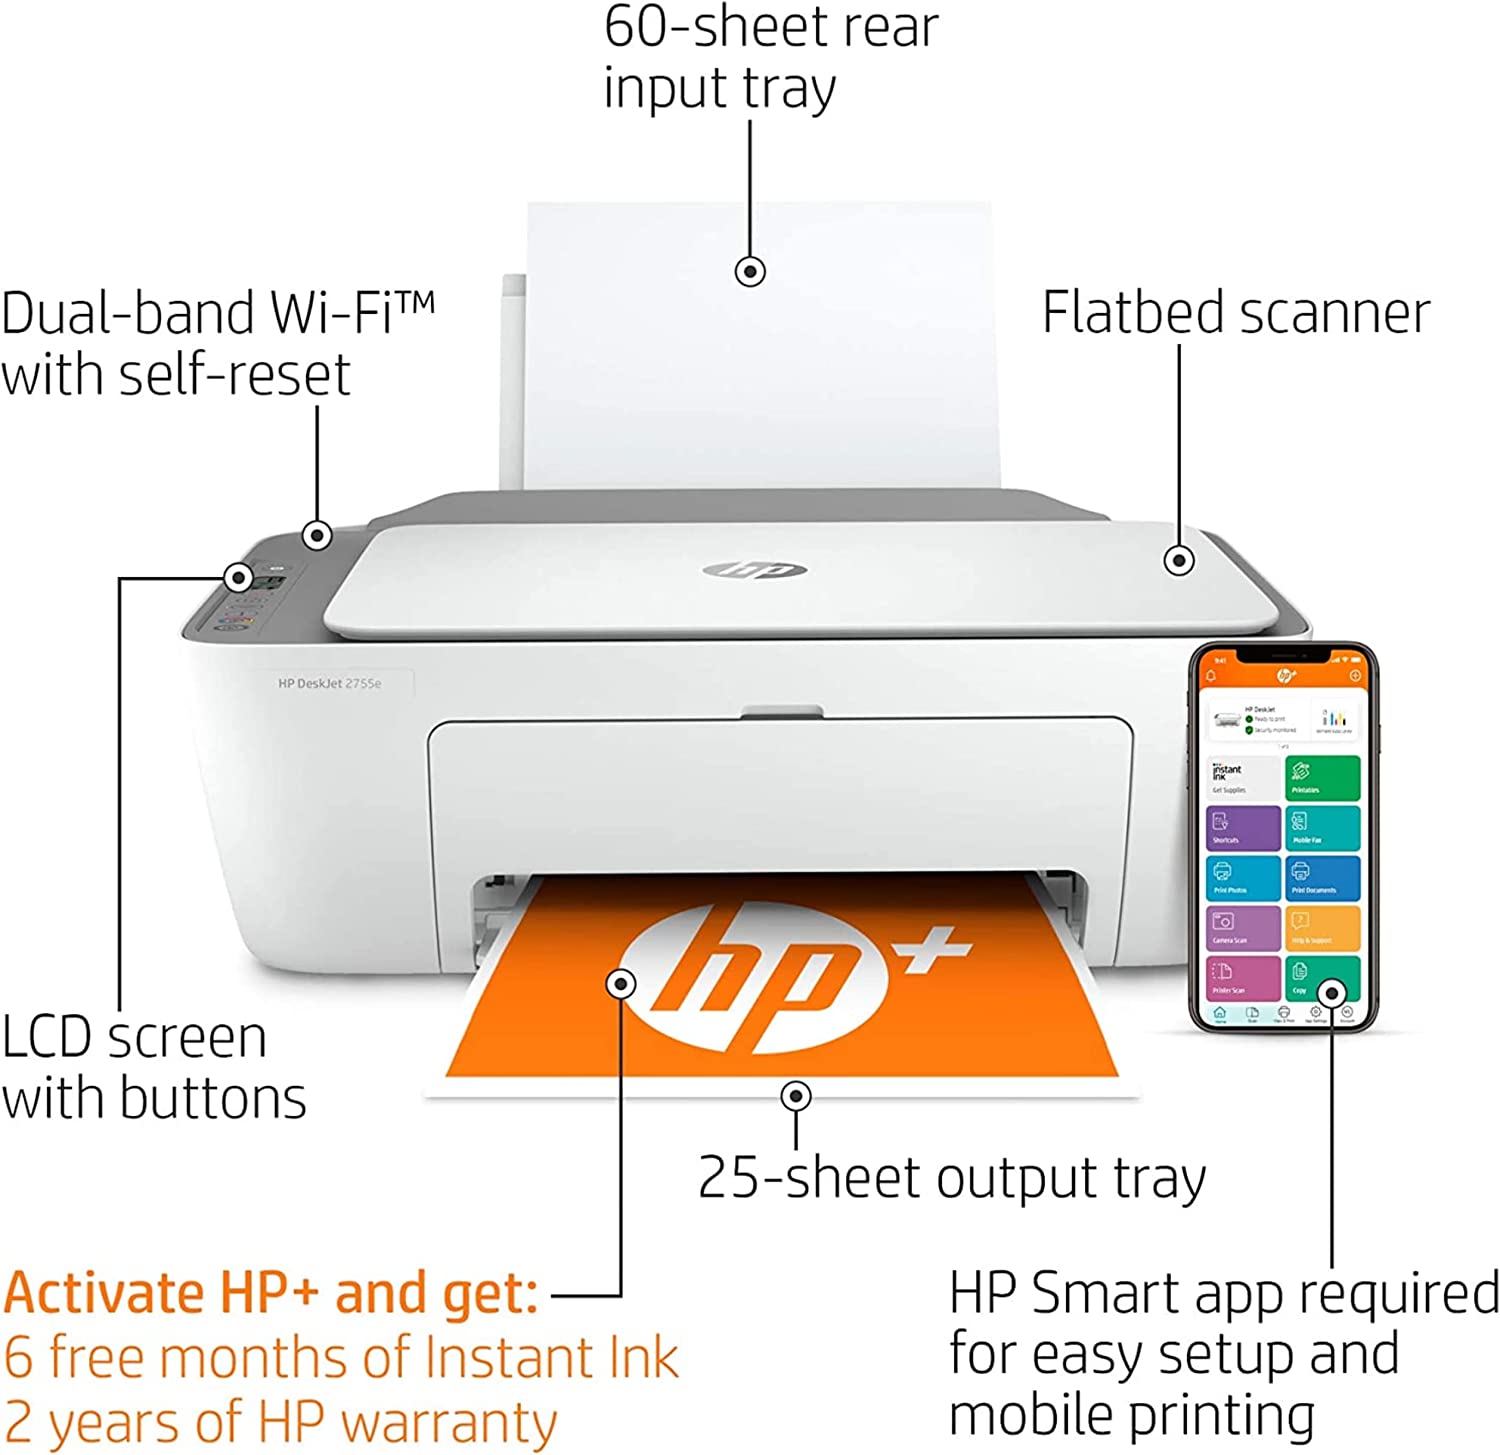 1neego-hp-all-in-one-wireless-color-inkjet-printer